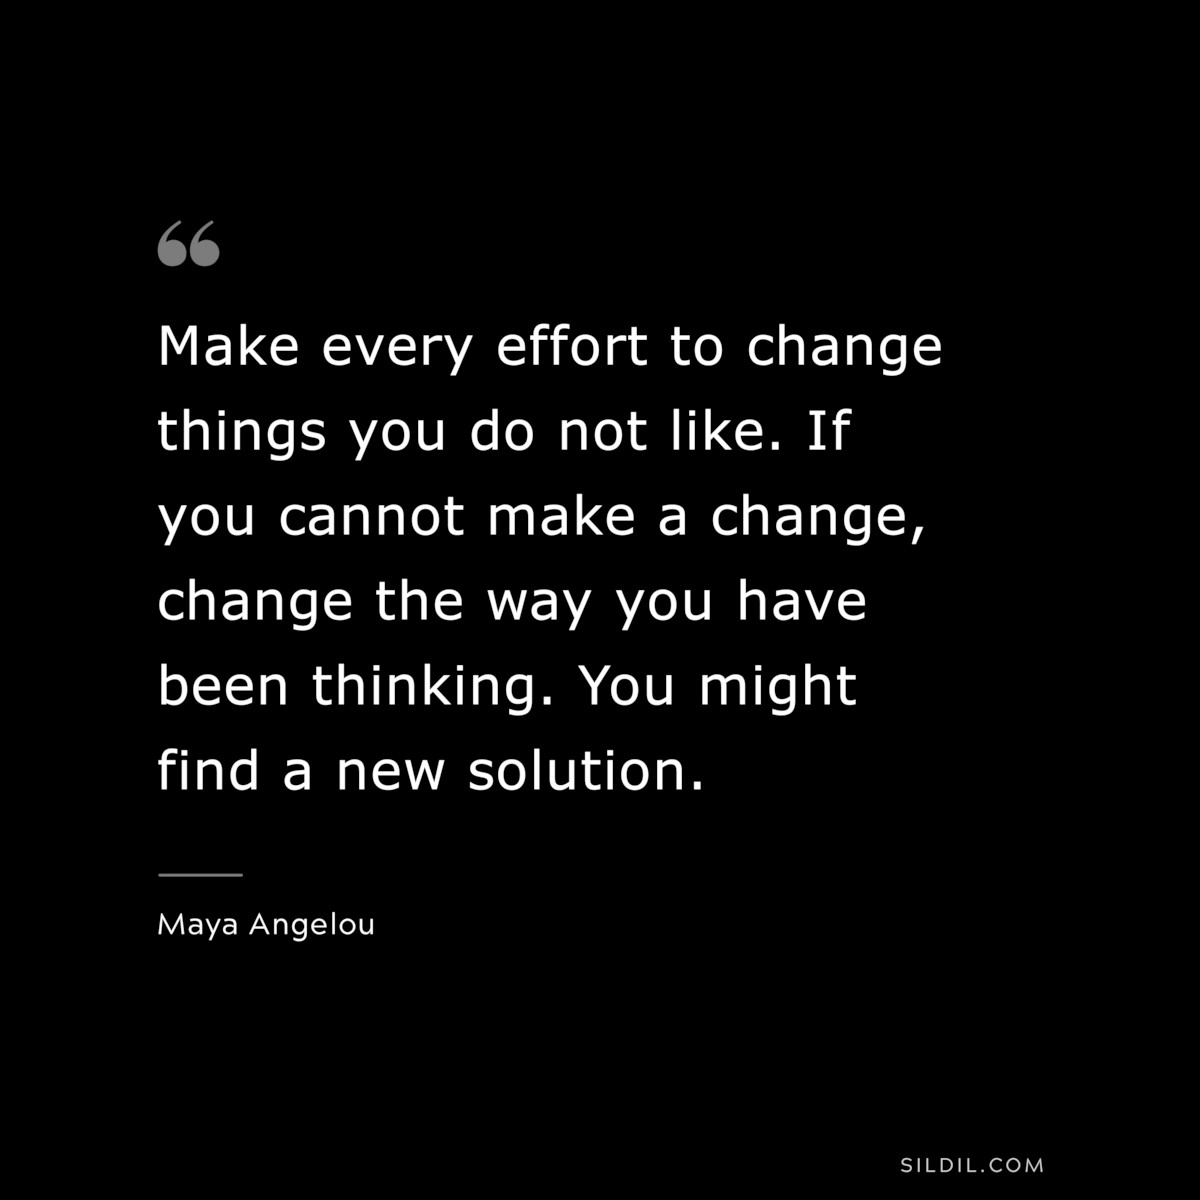 Make every effort to change things you do not like. If you cannot make a change, change the way you have been thinking. You might find a new solution. ― Maya Angelou